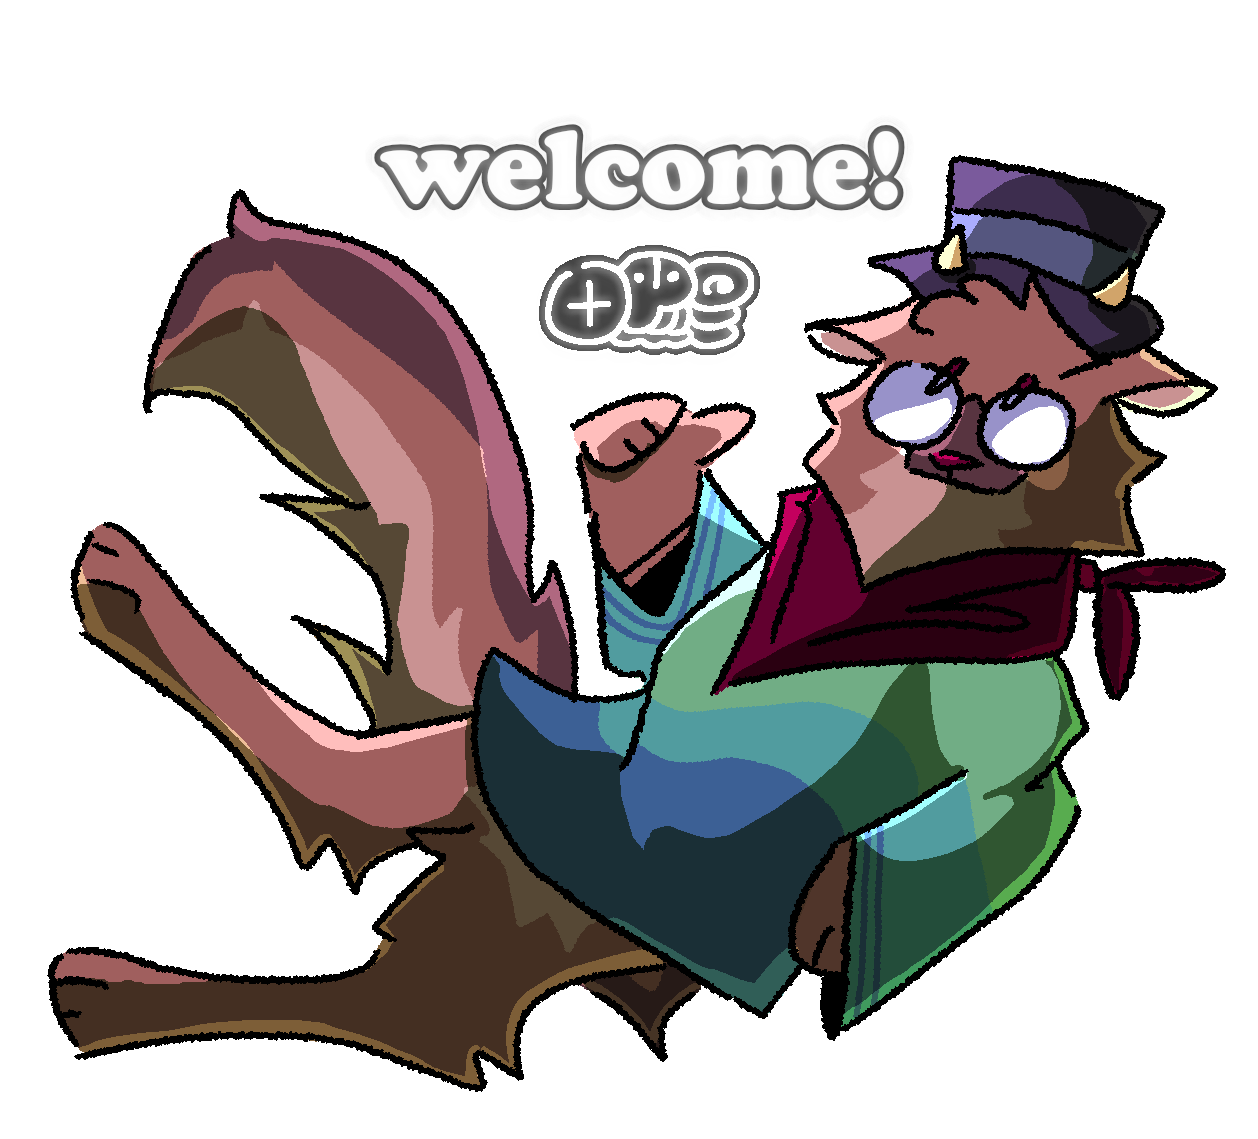 ID: the text "welcome!", and my signature, both glowing bright white. illuminated by the light, a drawing of my sona named "Horizon" giving you a thumbs up. Horizon is a bipedal, anthropomorphic creature. it is reddish-brown and has a bushy tail. it dons a top hat and a pair of purple-lensed glasses. it wears a neckerchief and a loose-fitting shirt. the shirt goes from light green to dark blue in three solid stripes. it is lit from behind as well. end ID.